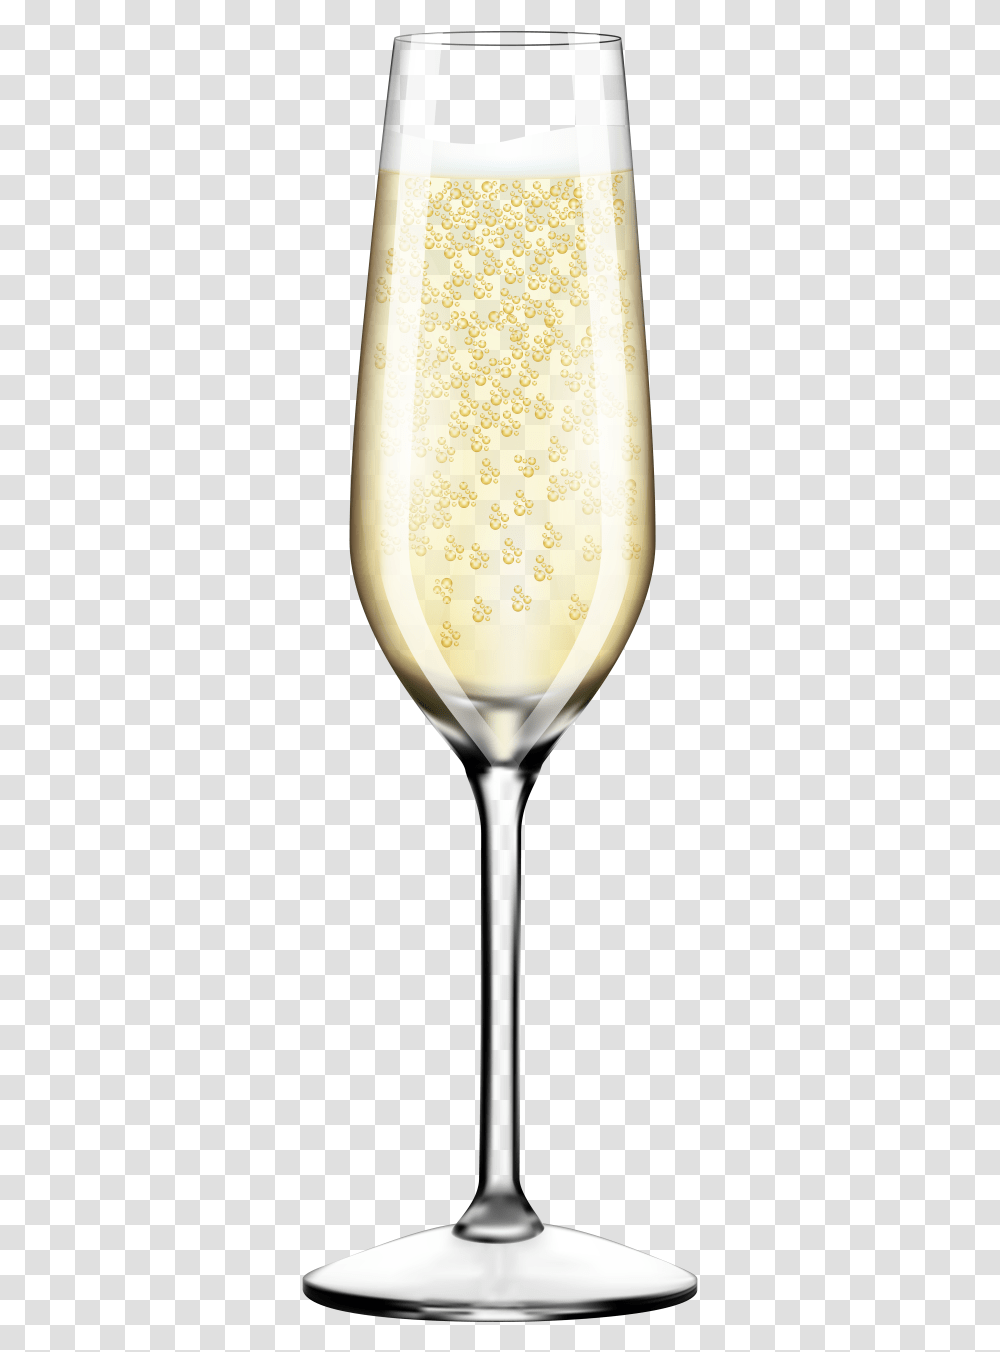 Champagne Glass Clip Art Image Glass Of Champagne Background, Wine Glass, Alcohol, Beverage, Drink Transparent Png